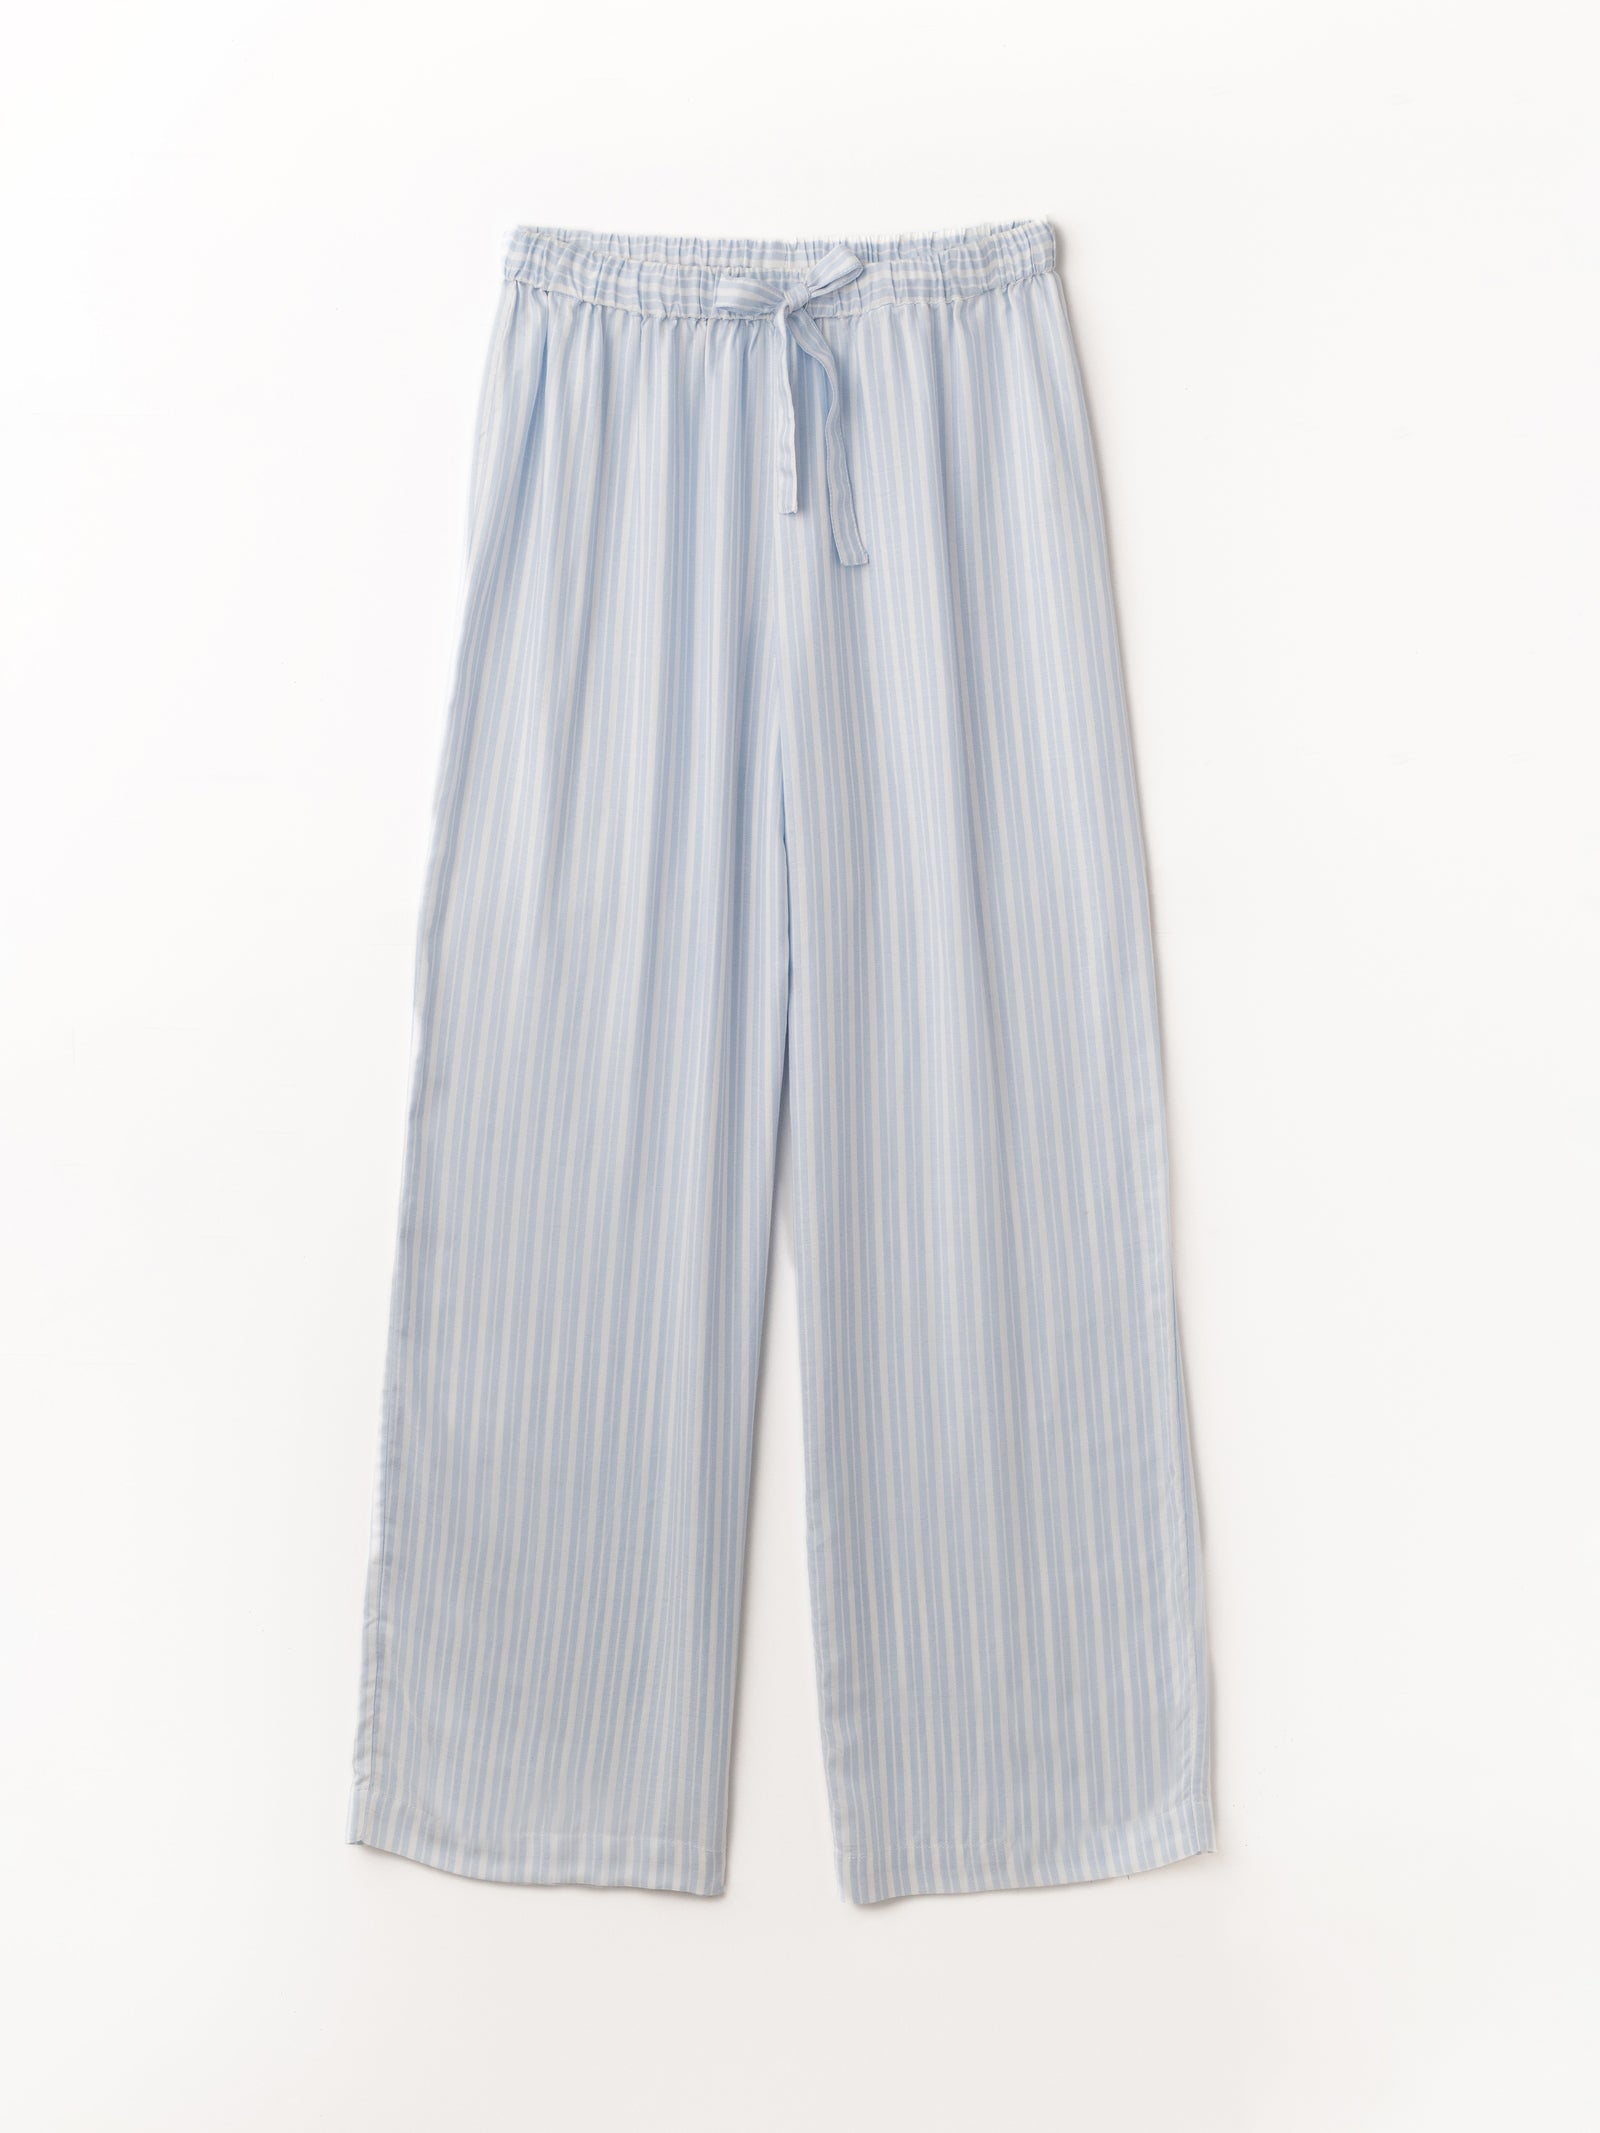 Soft woven pajama bottom in Spring Blue Stripe with white background 